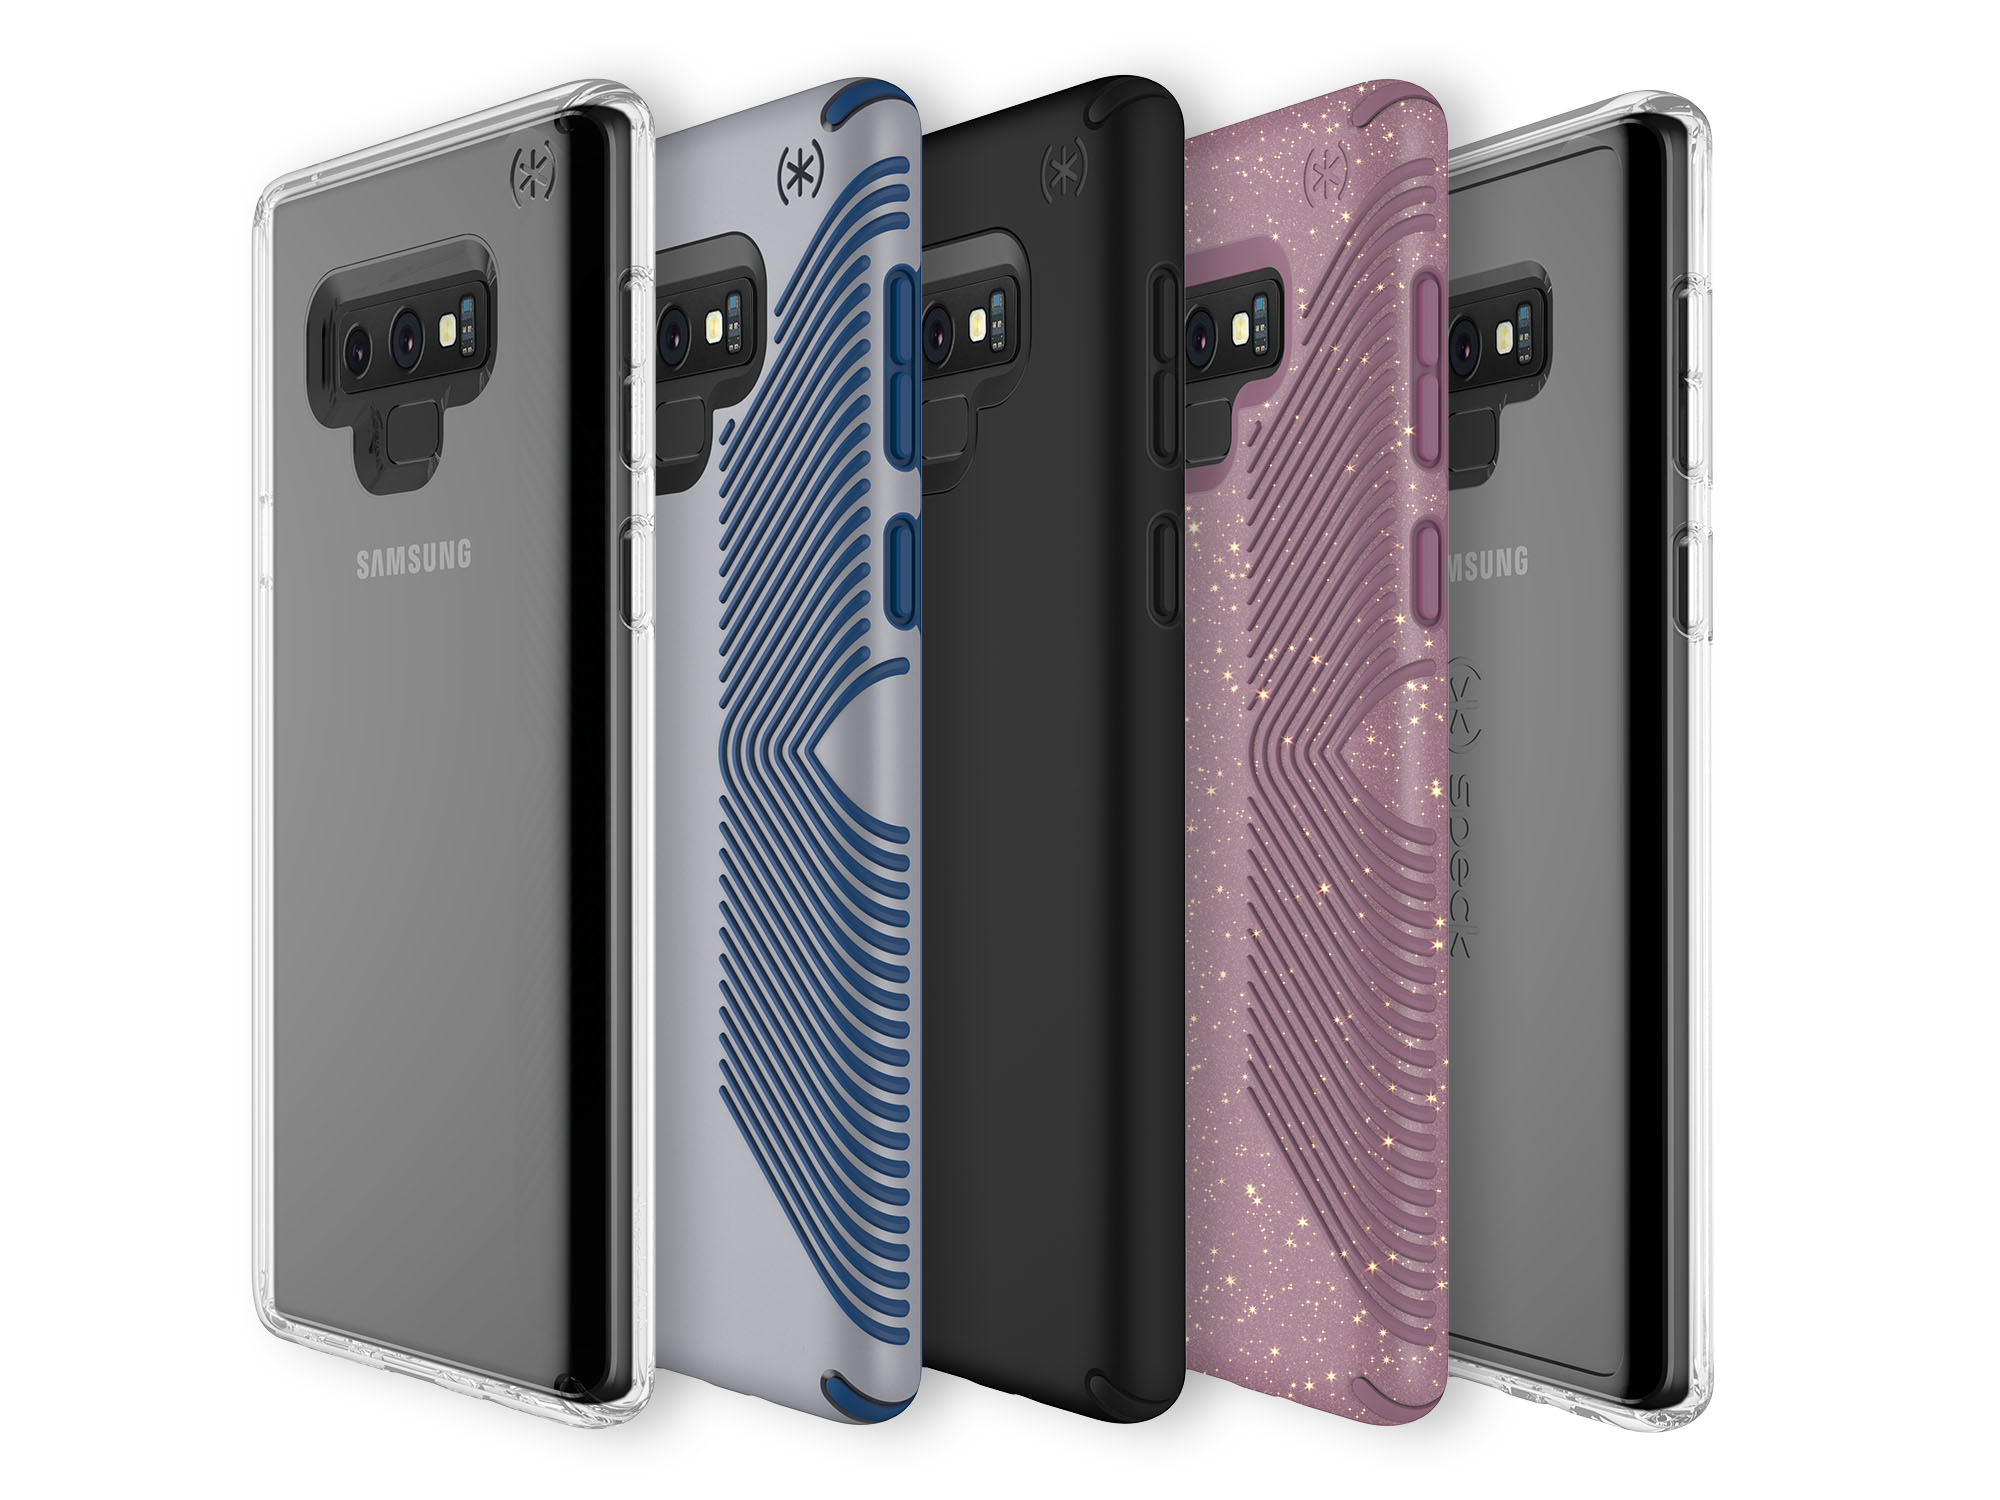 Samsung Galaxy Note9 Family—Presidio STAY CLEAR, Presidio GRIP, Presidio PRO, Presidio GRIP + GLITTER, and GemShell